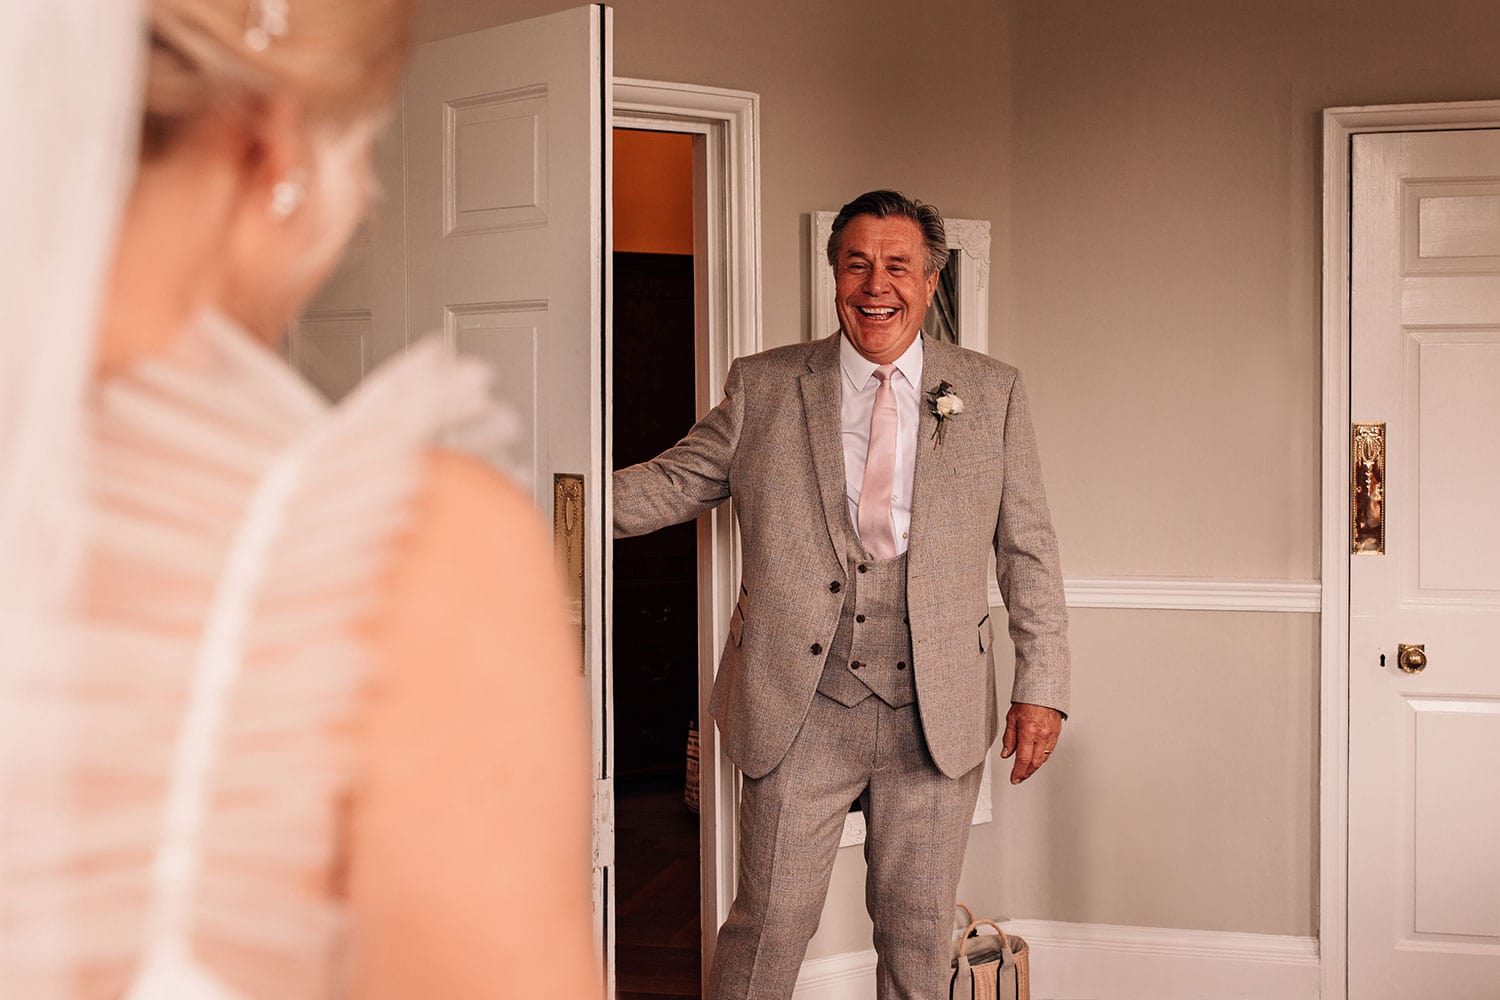 wedding morning timeline - father seeing daughter in dress for the first time